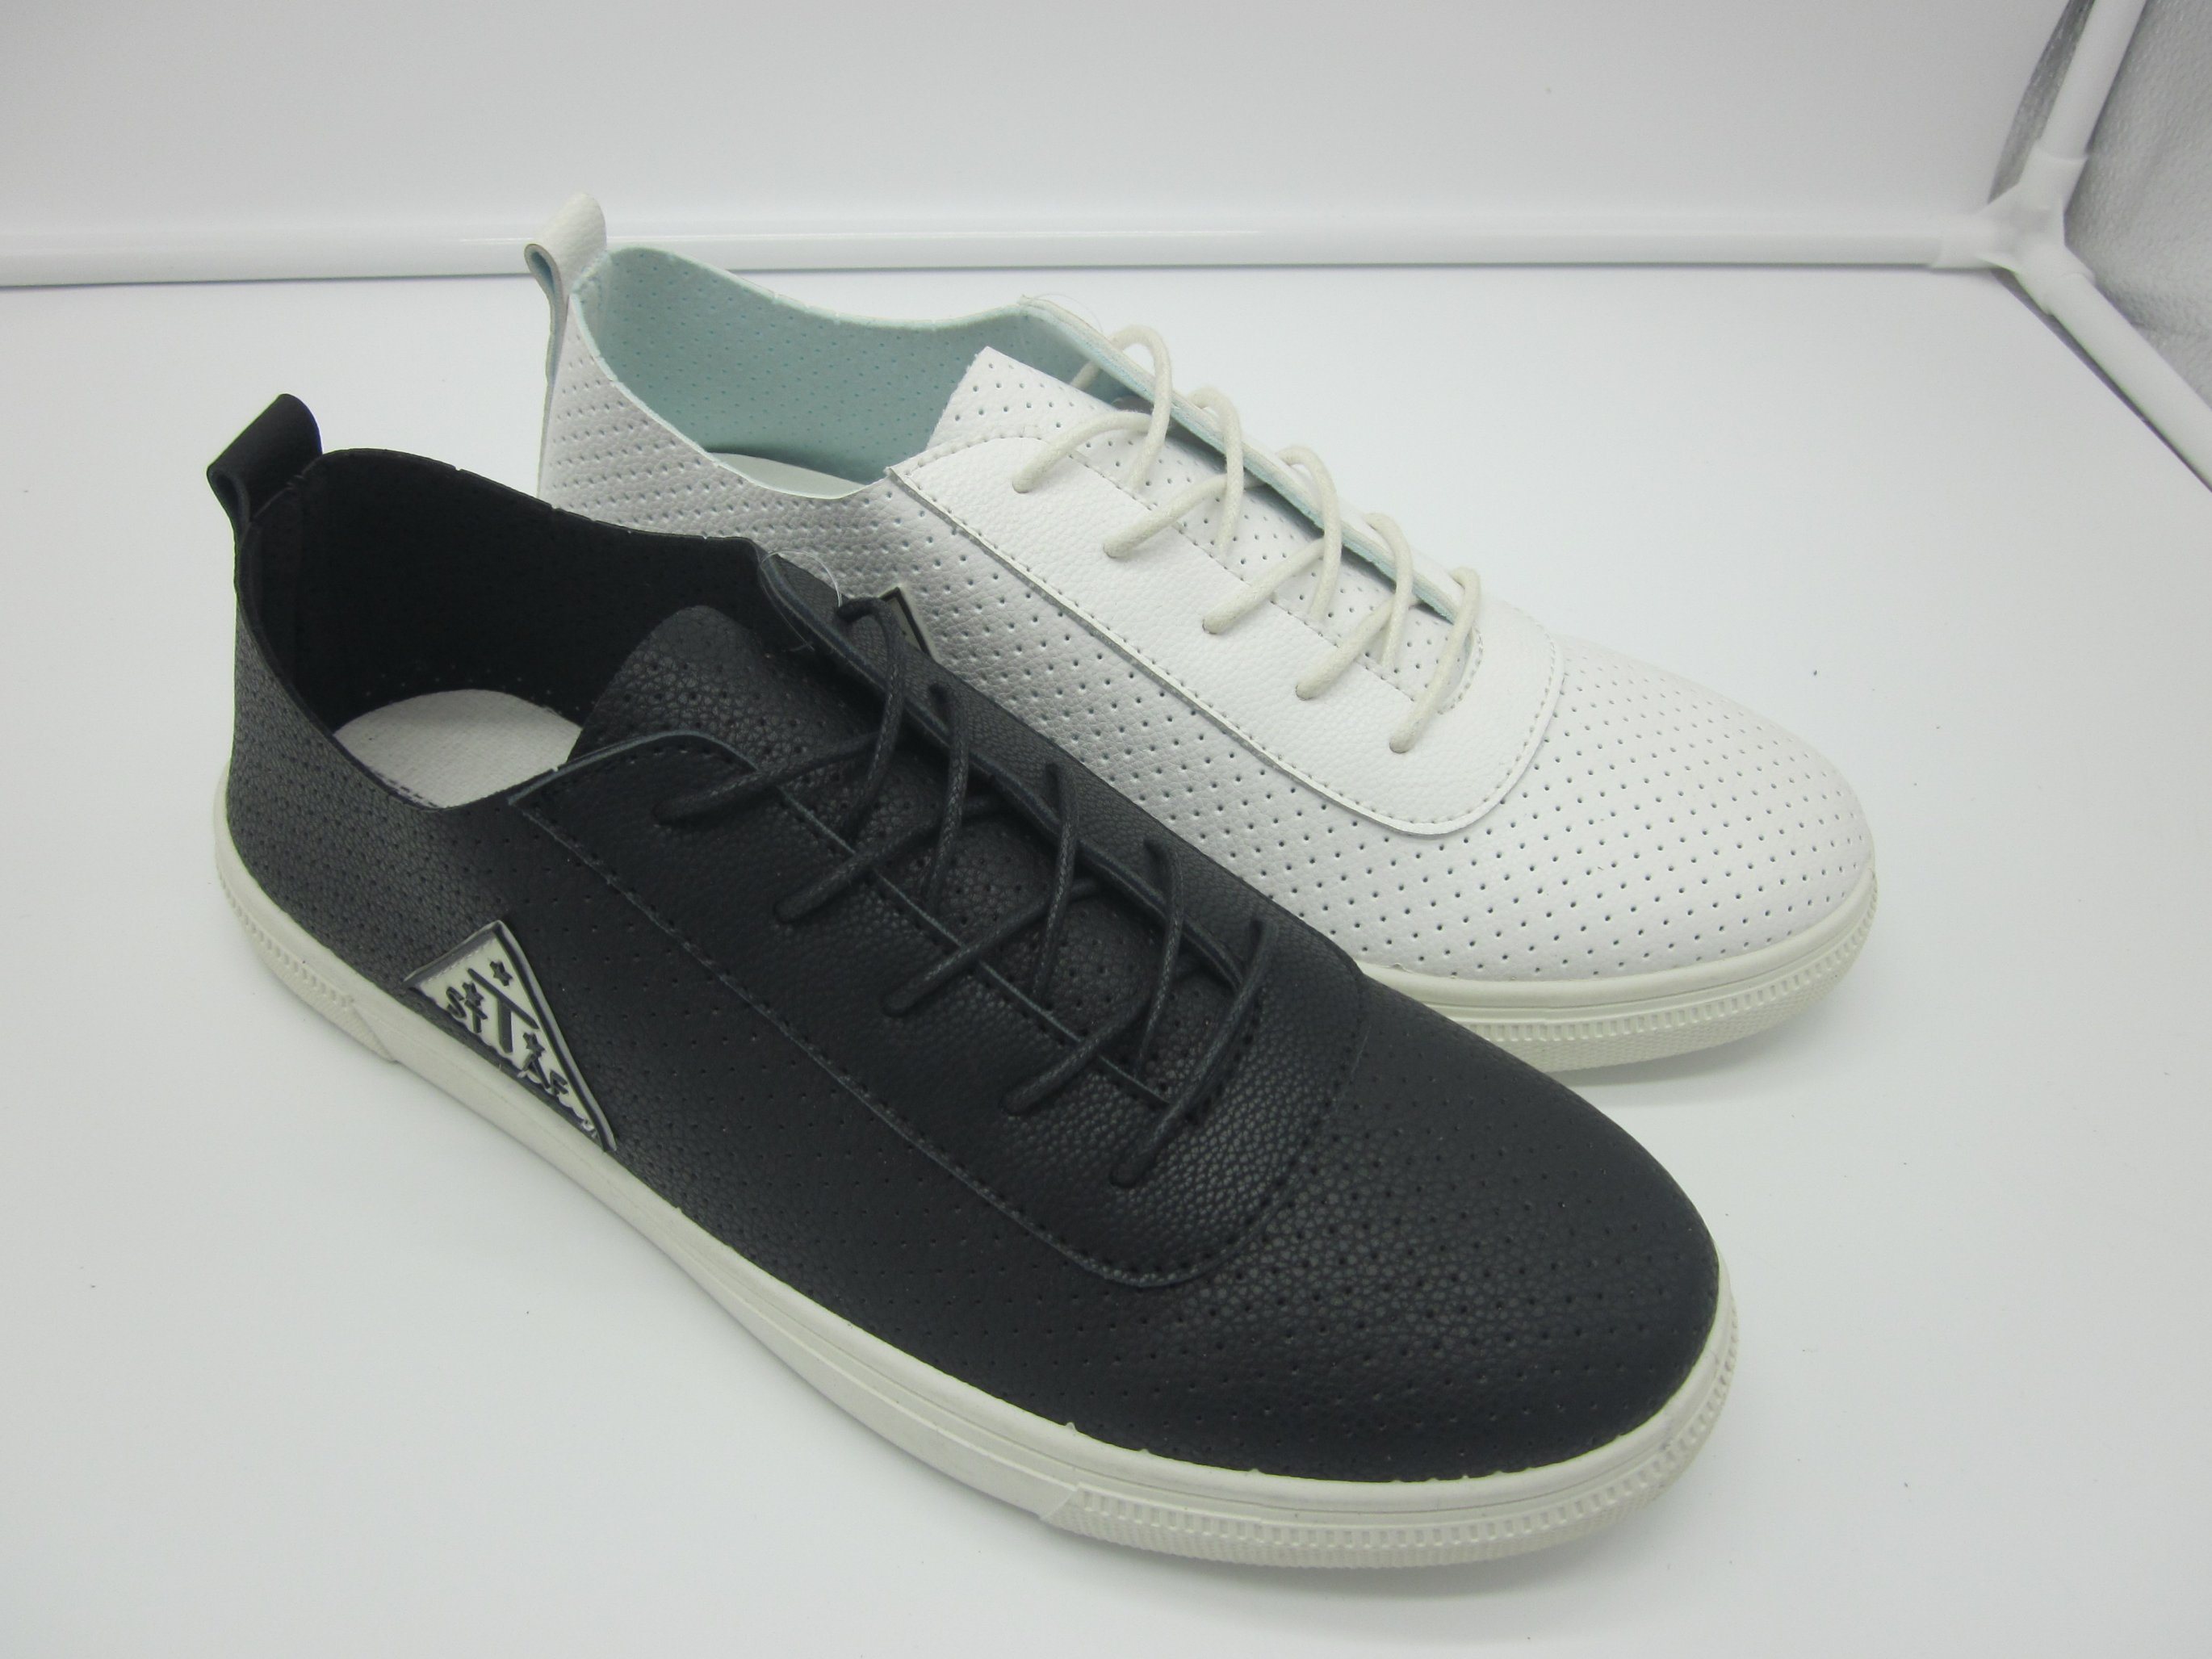 Fashion PU Casual Breathable Leisure Shoes for Men